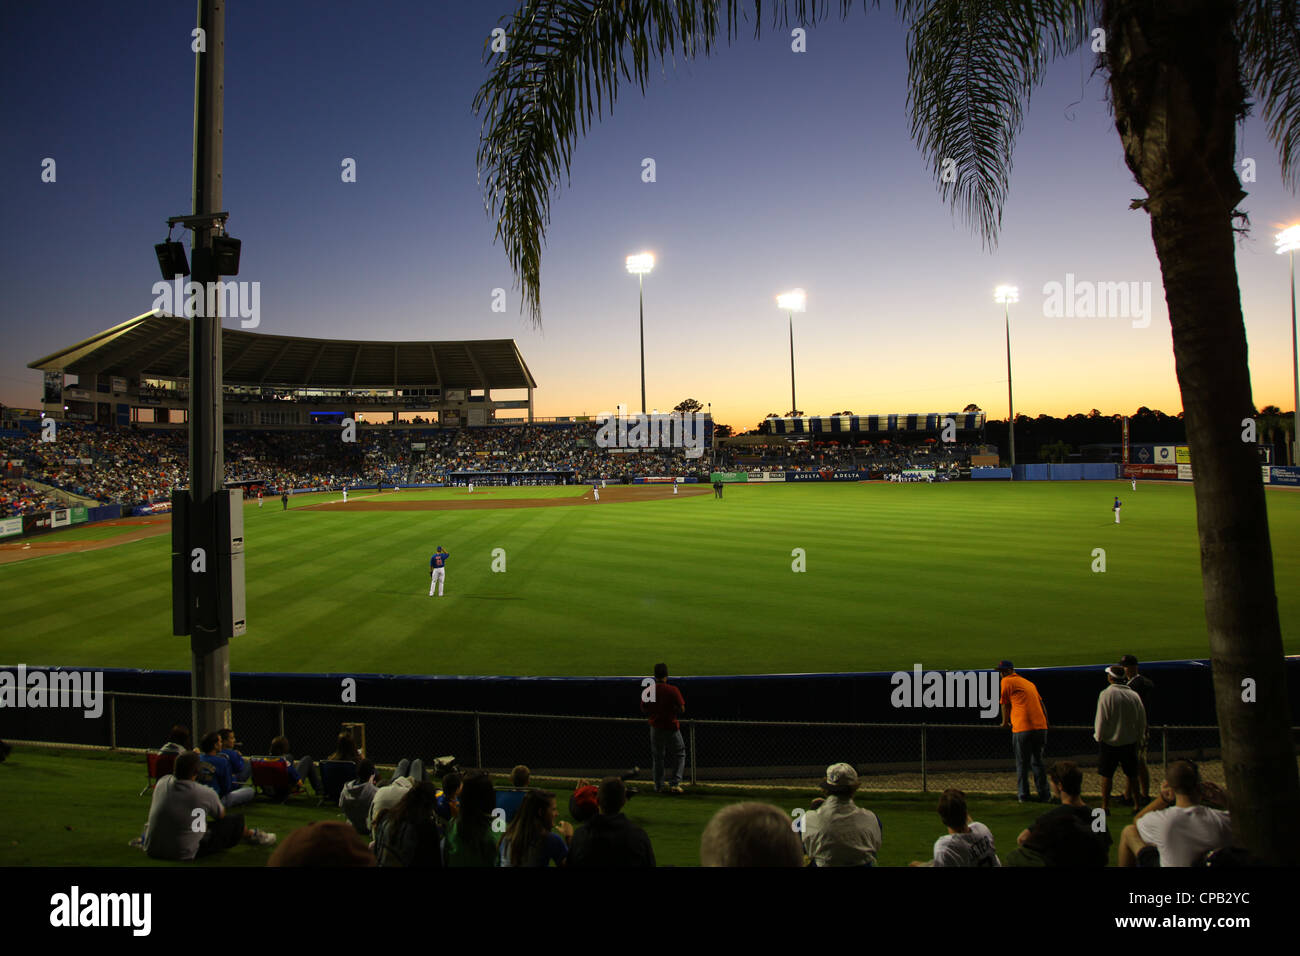 Twilight at Digital Domain Park during the opening game of the NY Mets 2012 spring training, Port St Lucie, FL, USA Stock Photo